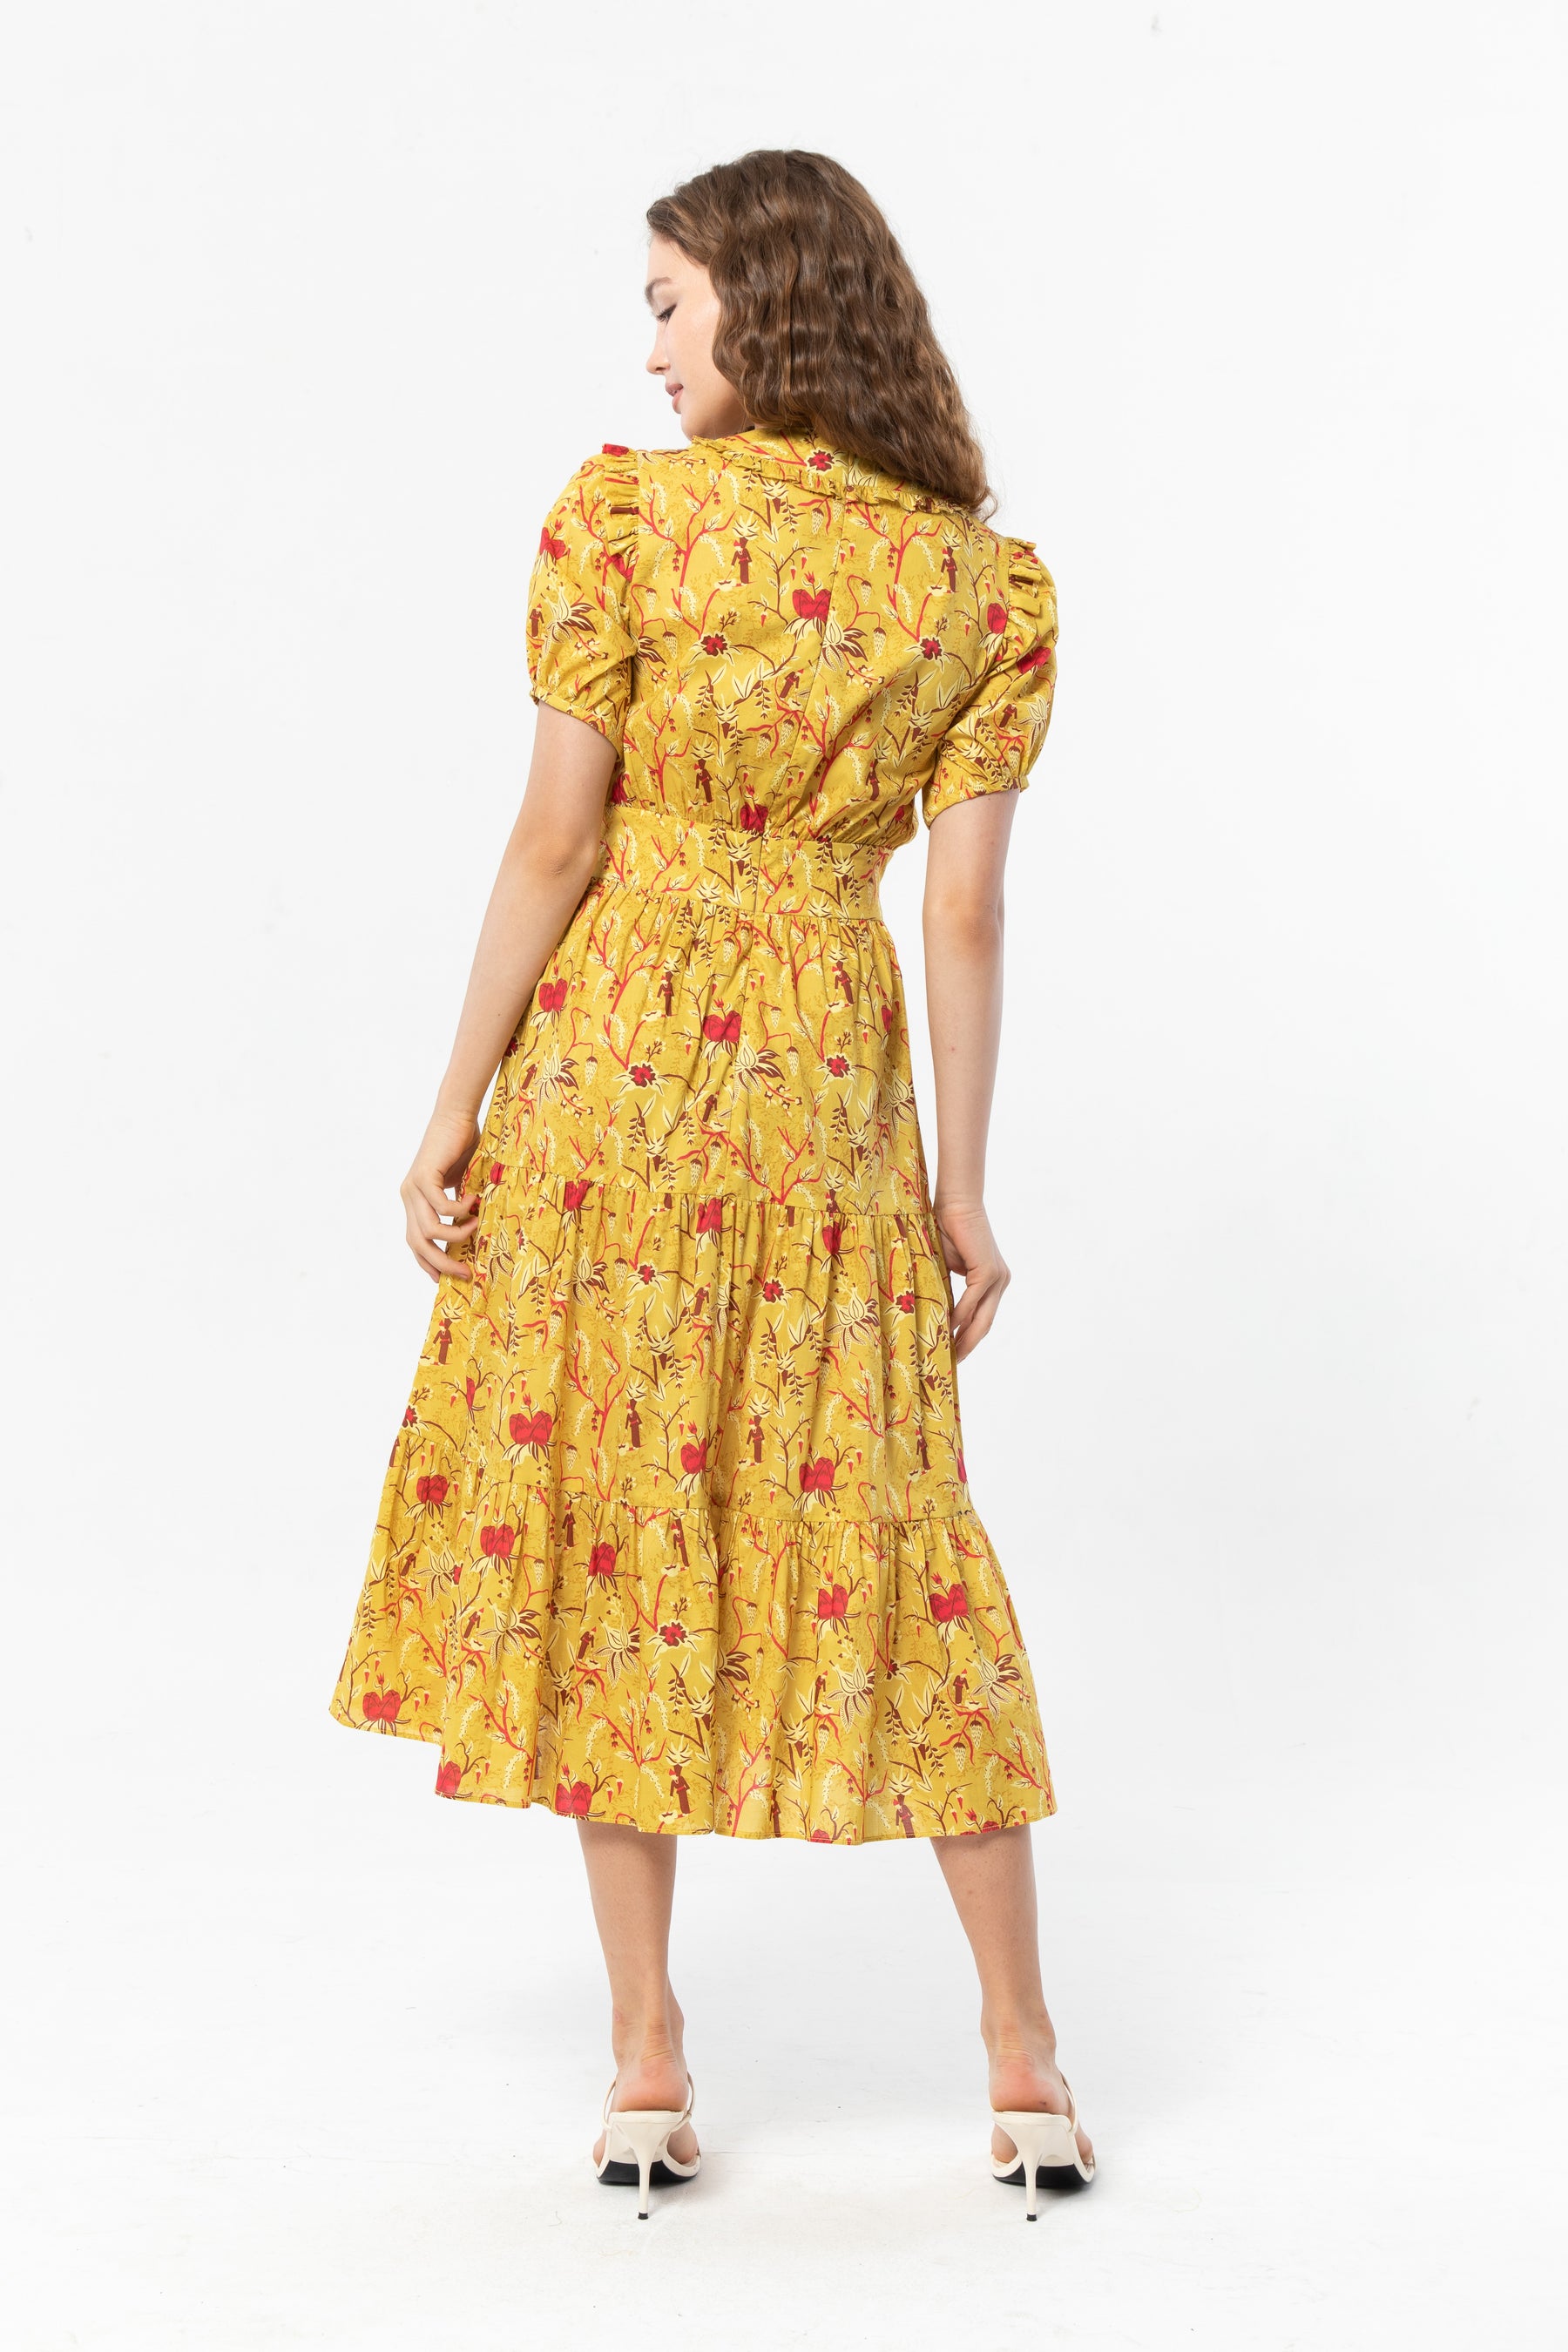 ELINA Dress in Mustard Spices